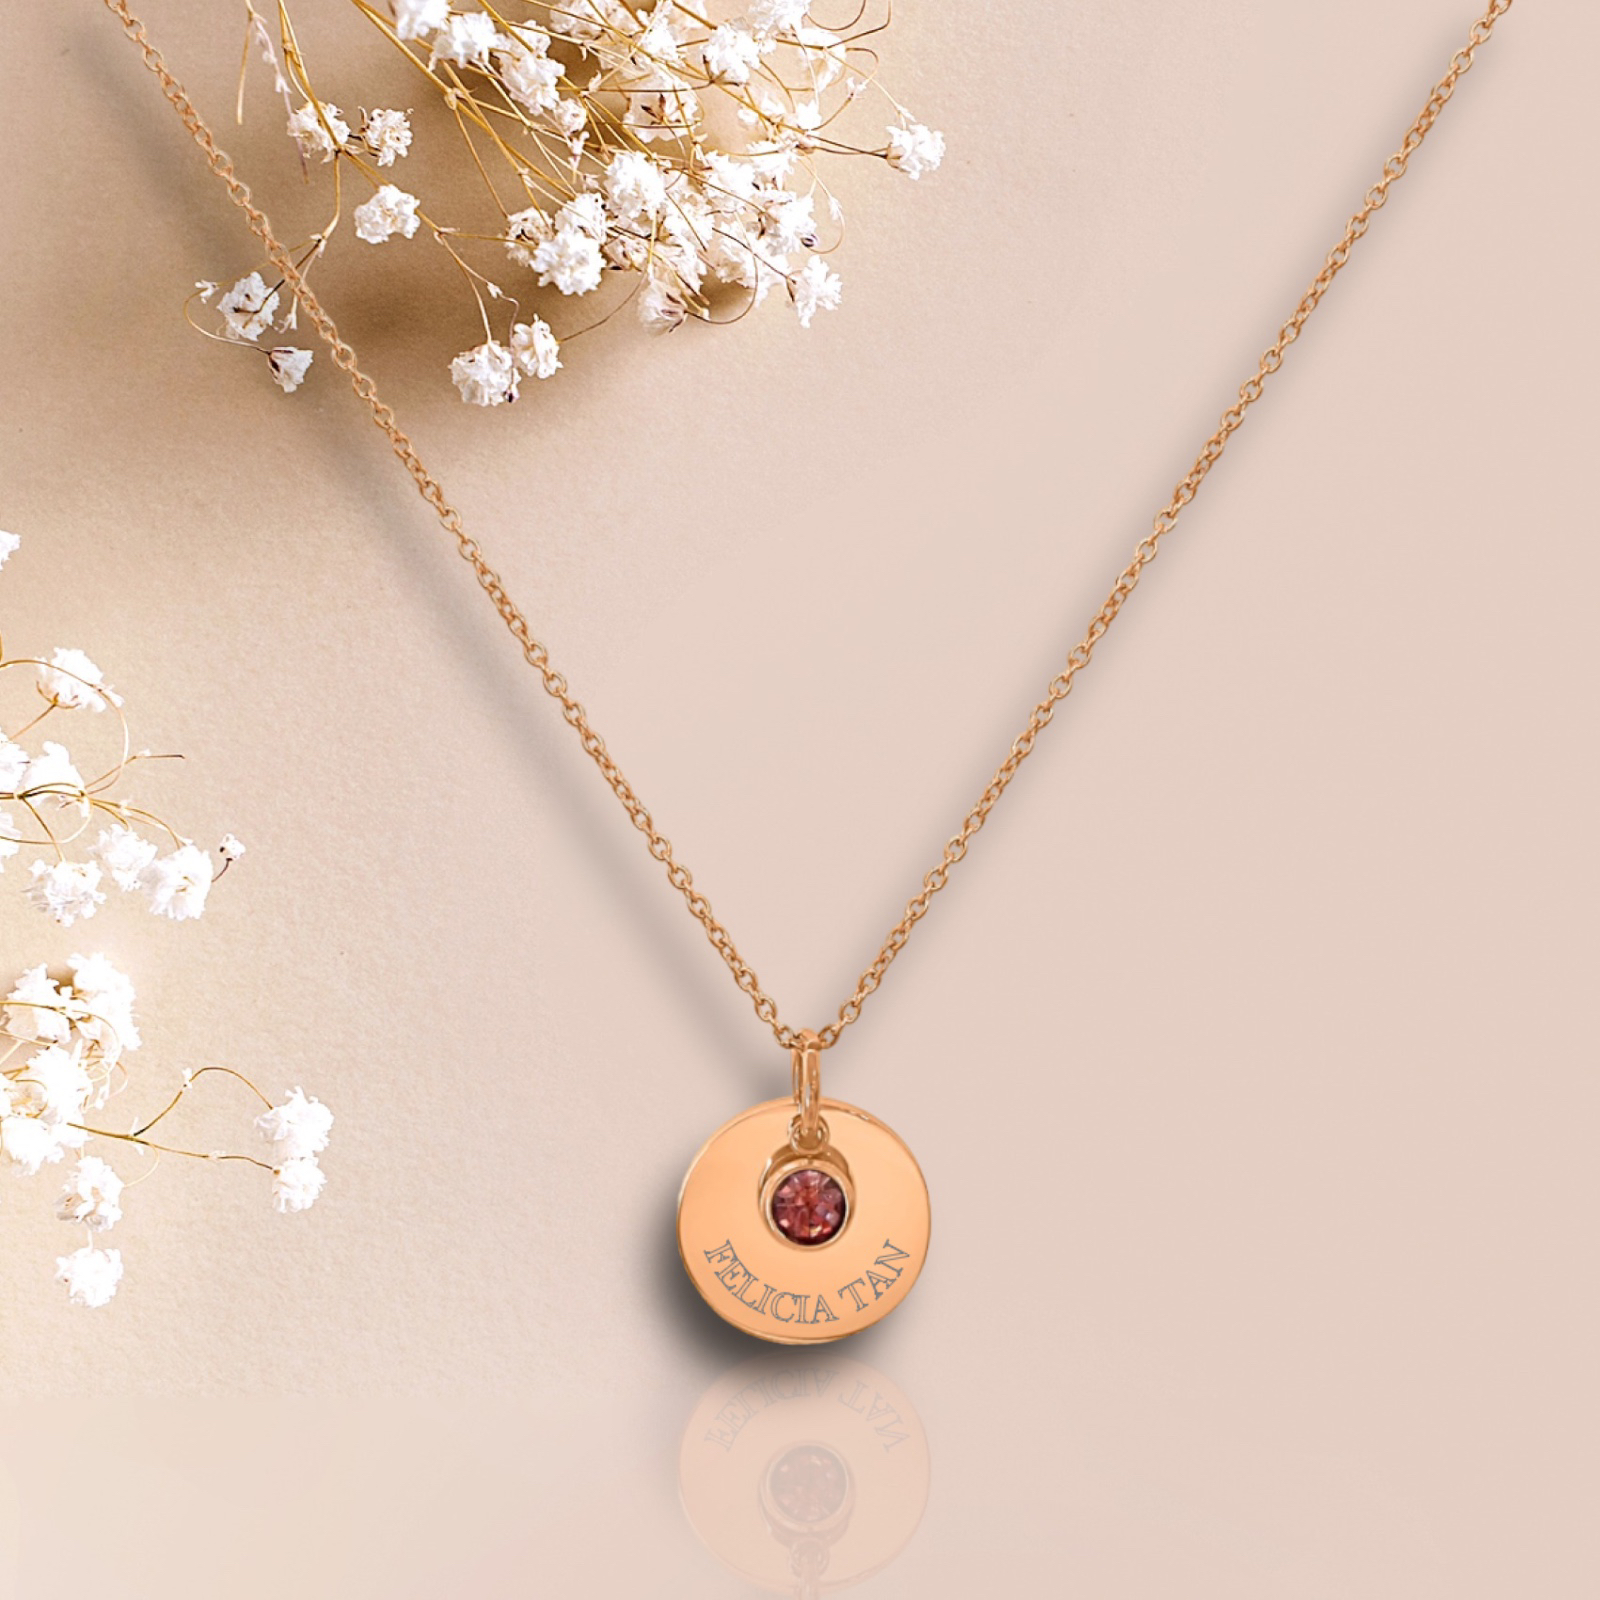 Birthstone Charm Necklace - Rose Gold